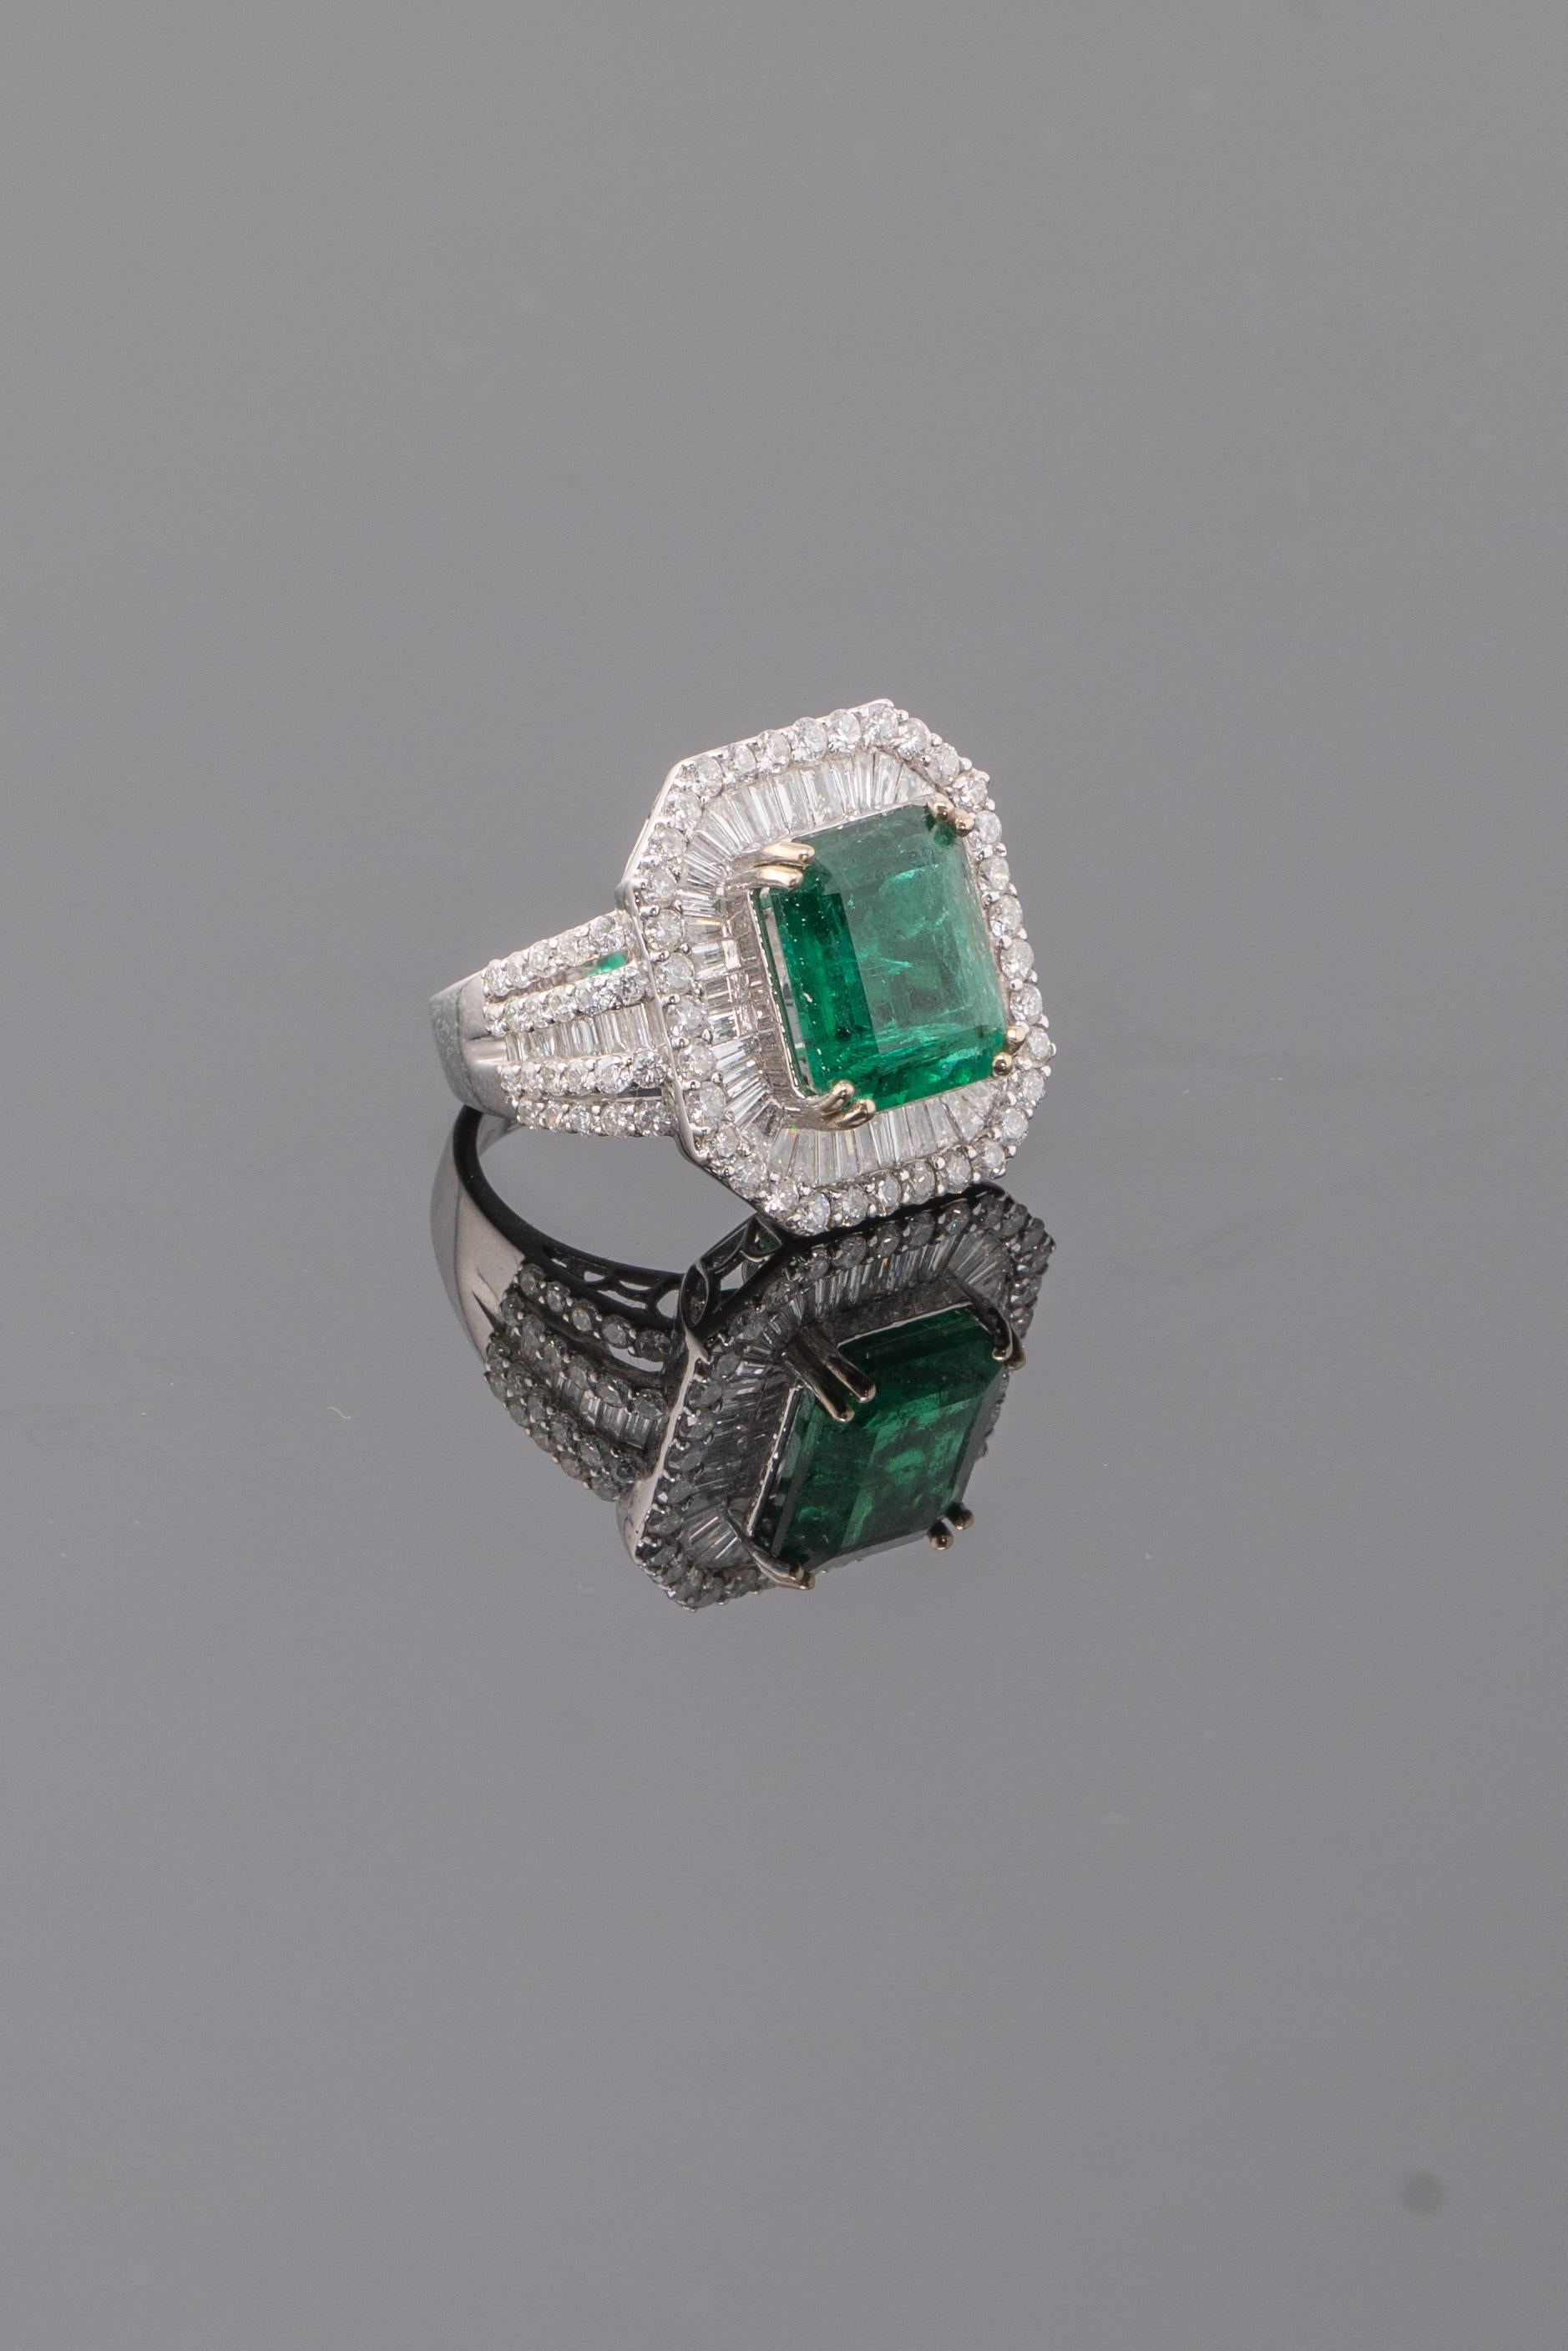 A beautiful 6.30 carat Emerald cocktail engagement ring, with high quality diamonds surrounding it - the Emerald has great luster and an ideal vivid green color. It is a perfect ring if you want to make a statement!
Currently sized at US 7, can